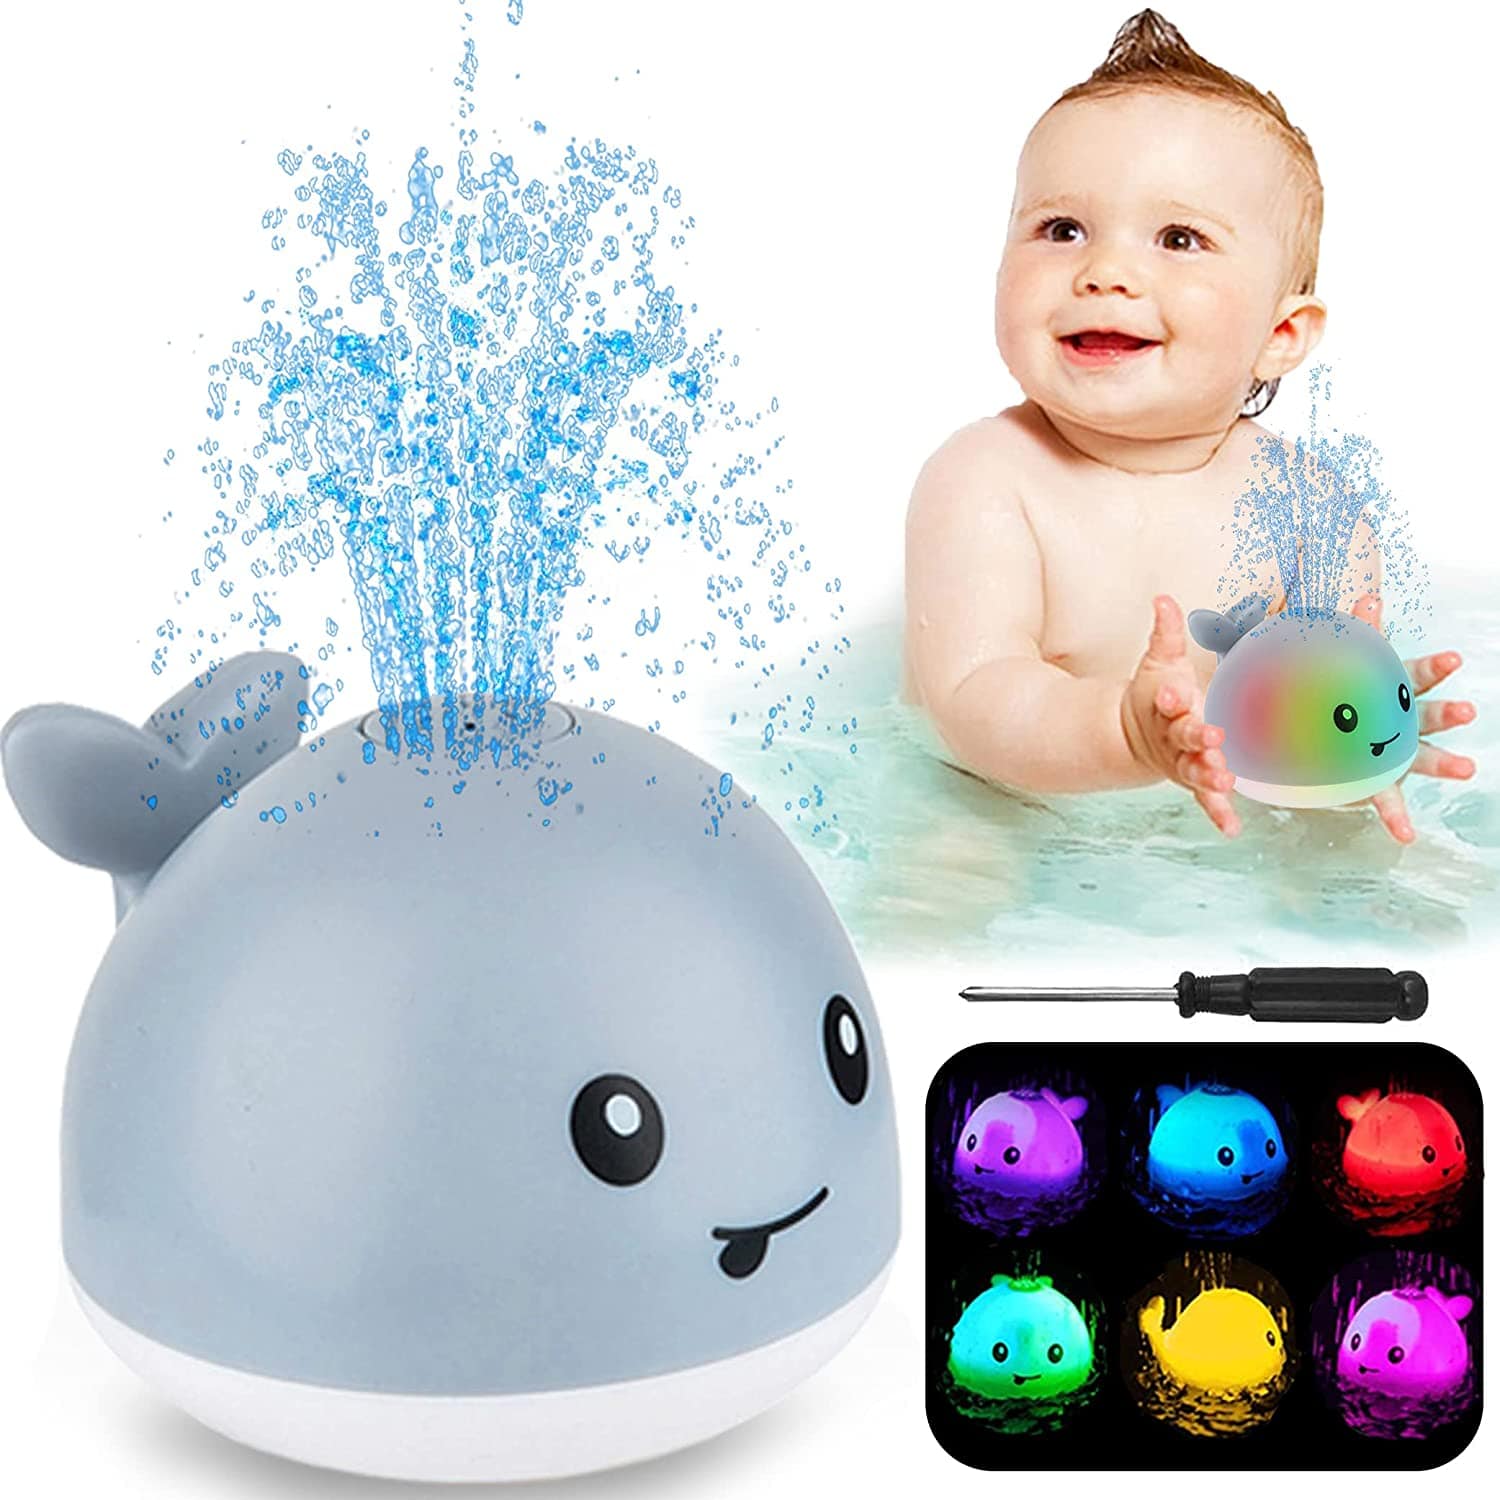 Baby sitting in water with a whale toy that changes colors and sprays water.